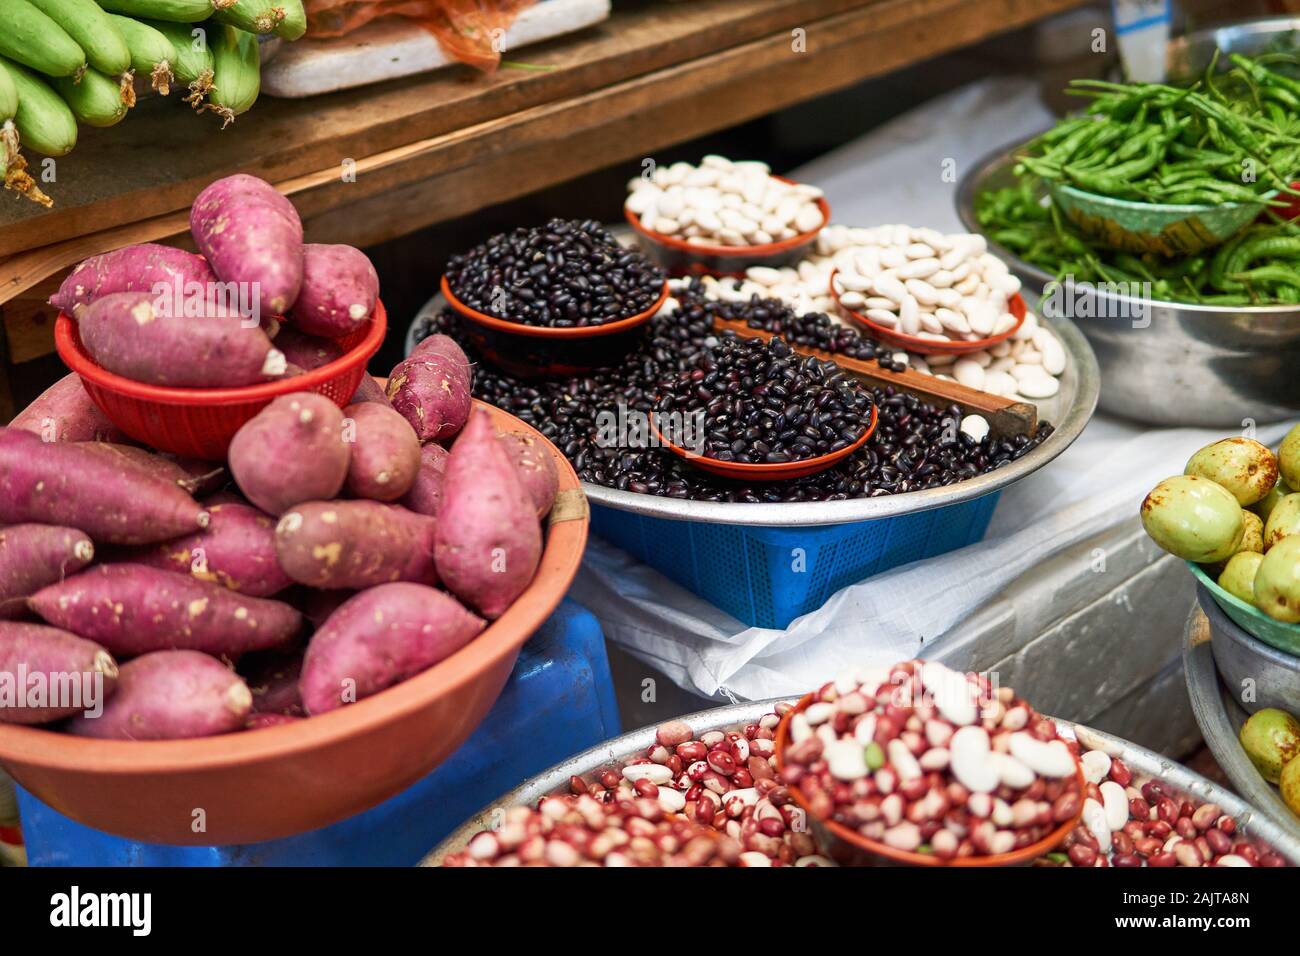 Black and white dried beans, sweet potatoes, jojoba, and other produce for sale at Gwangjang Market in Seoul, South Korea. Stock Photo